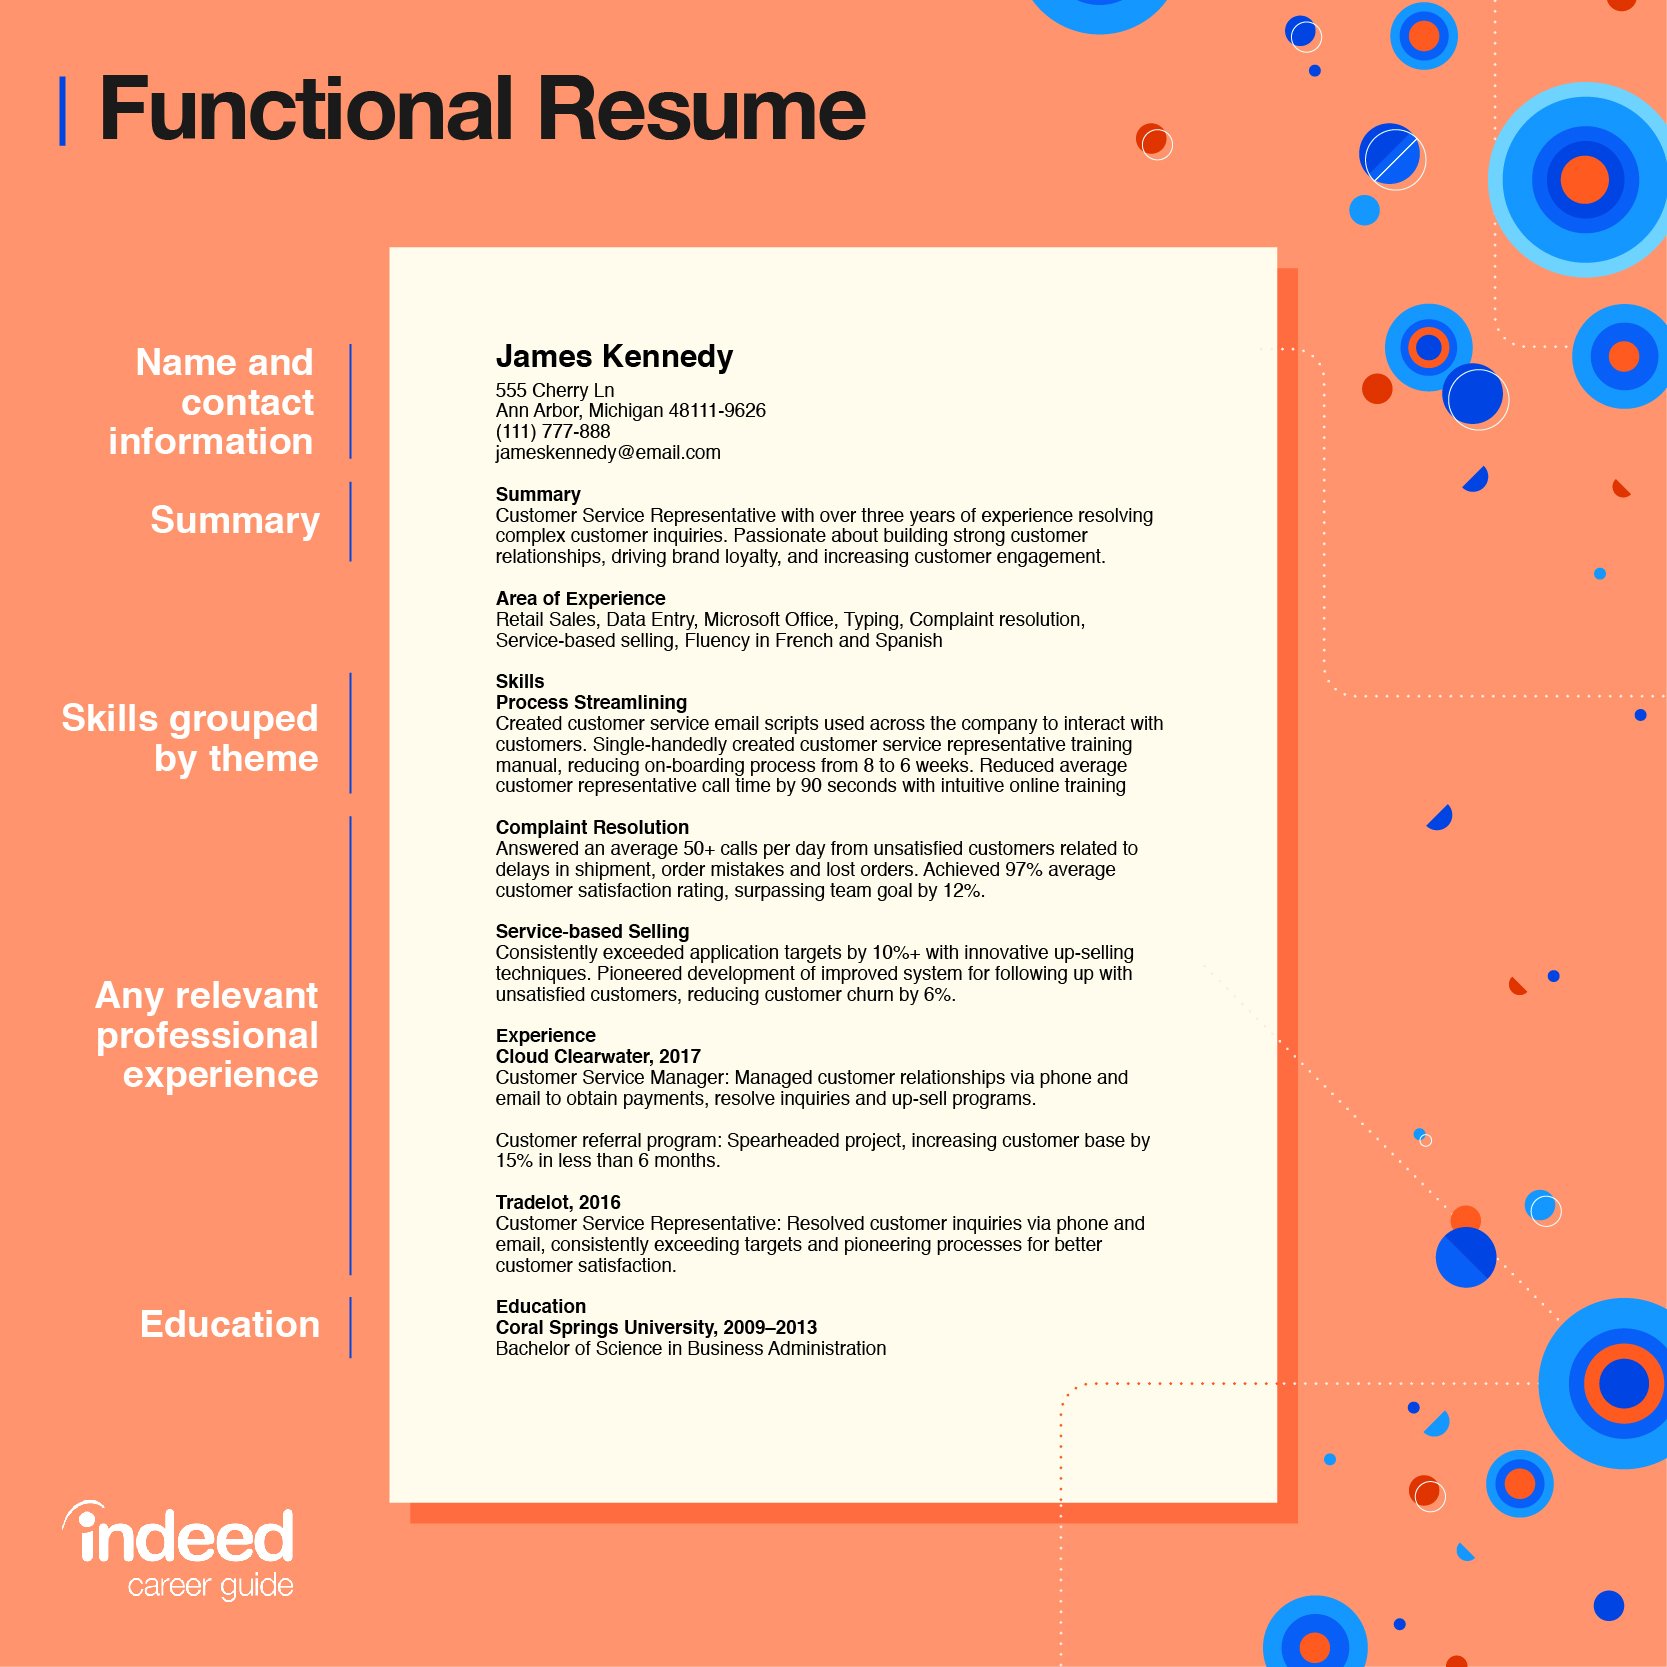 10 Best Skills to Include on a Resume (With Examples ...